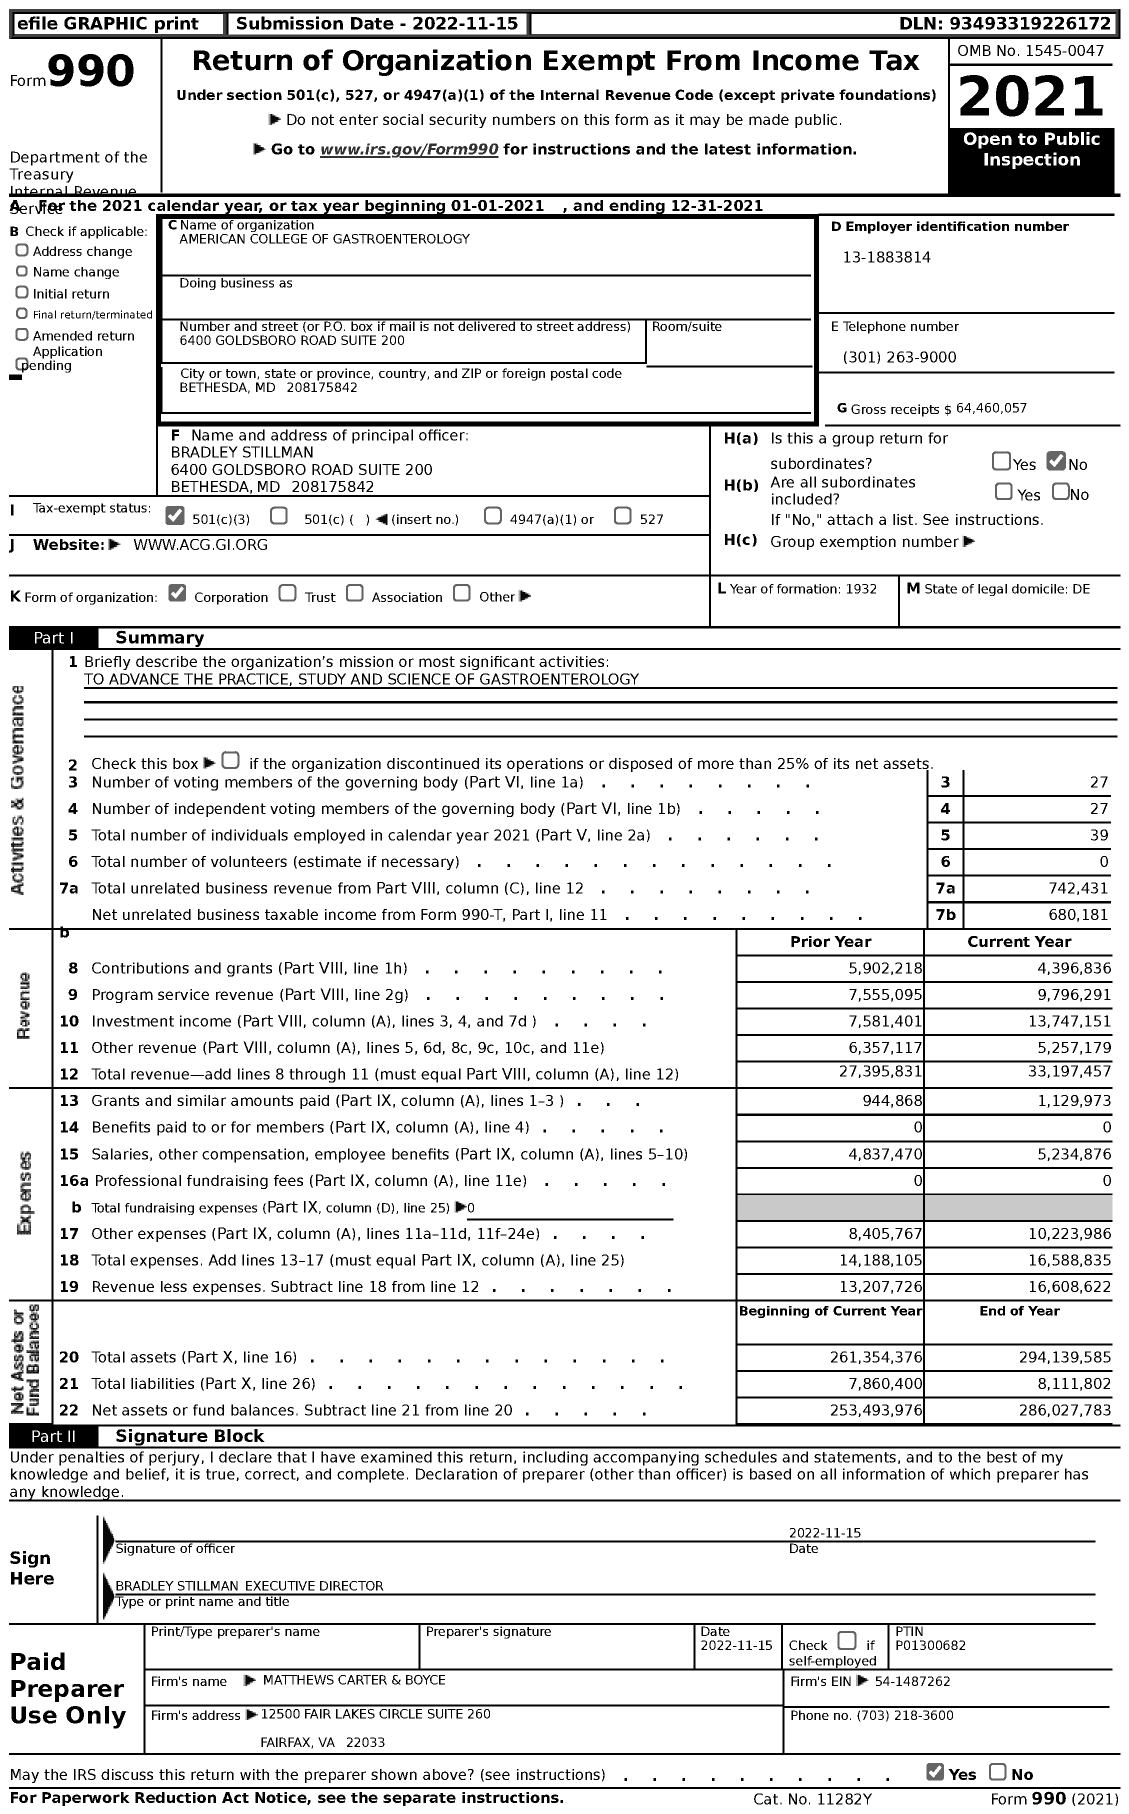 Image of first page of 2021 Form 990 for American College of Gastroenterology (ACG)